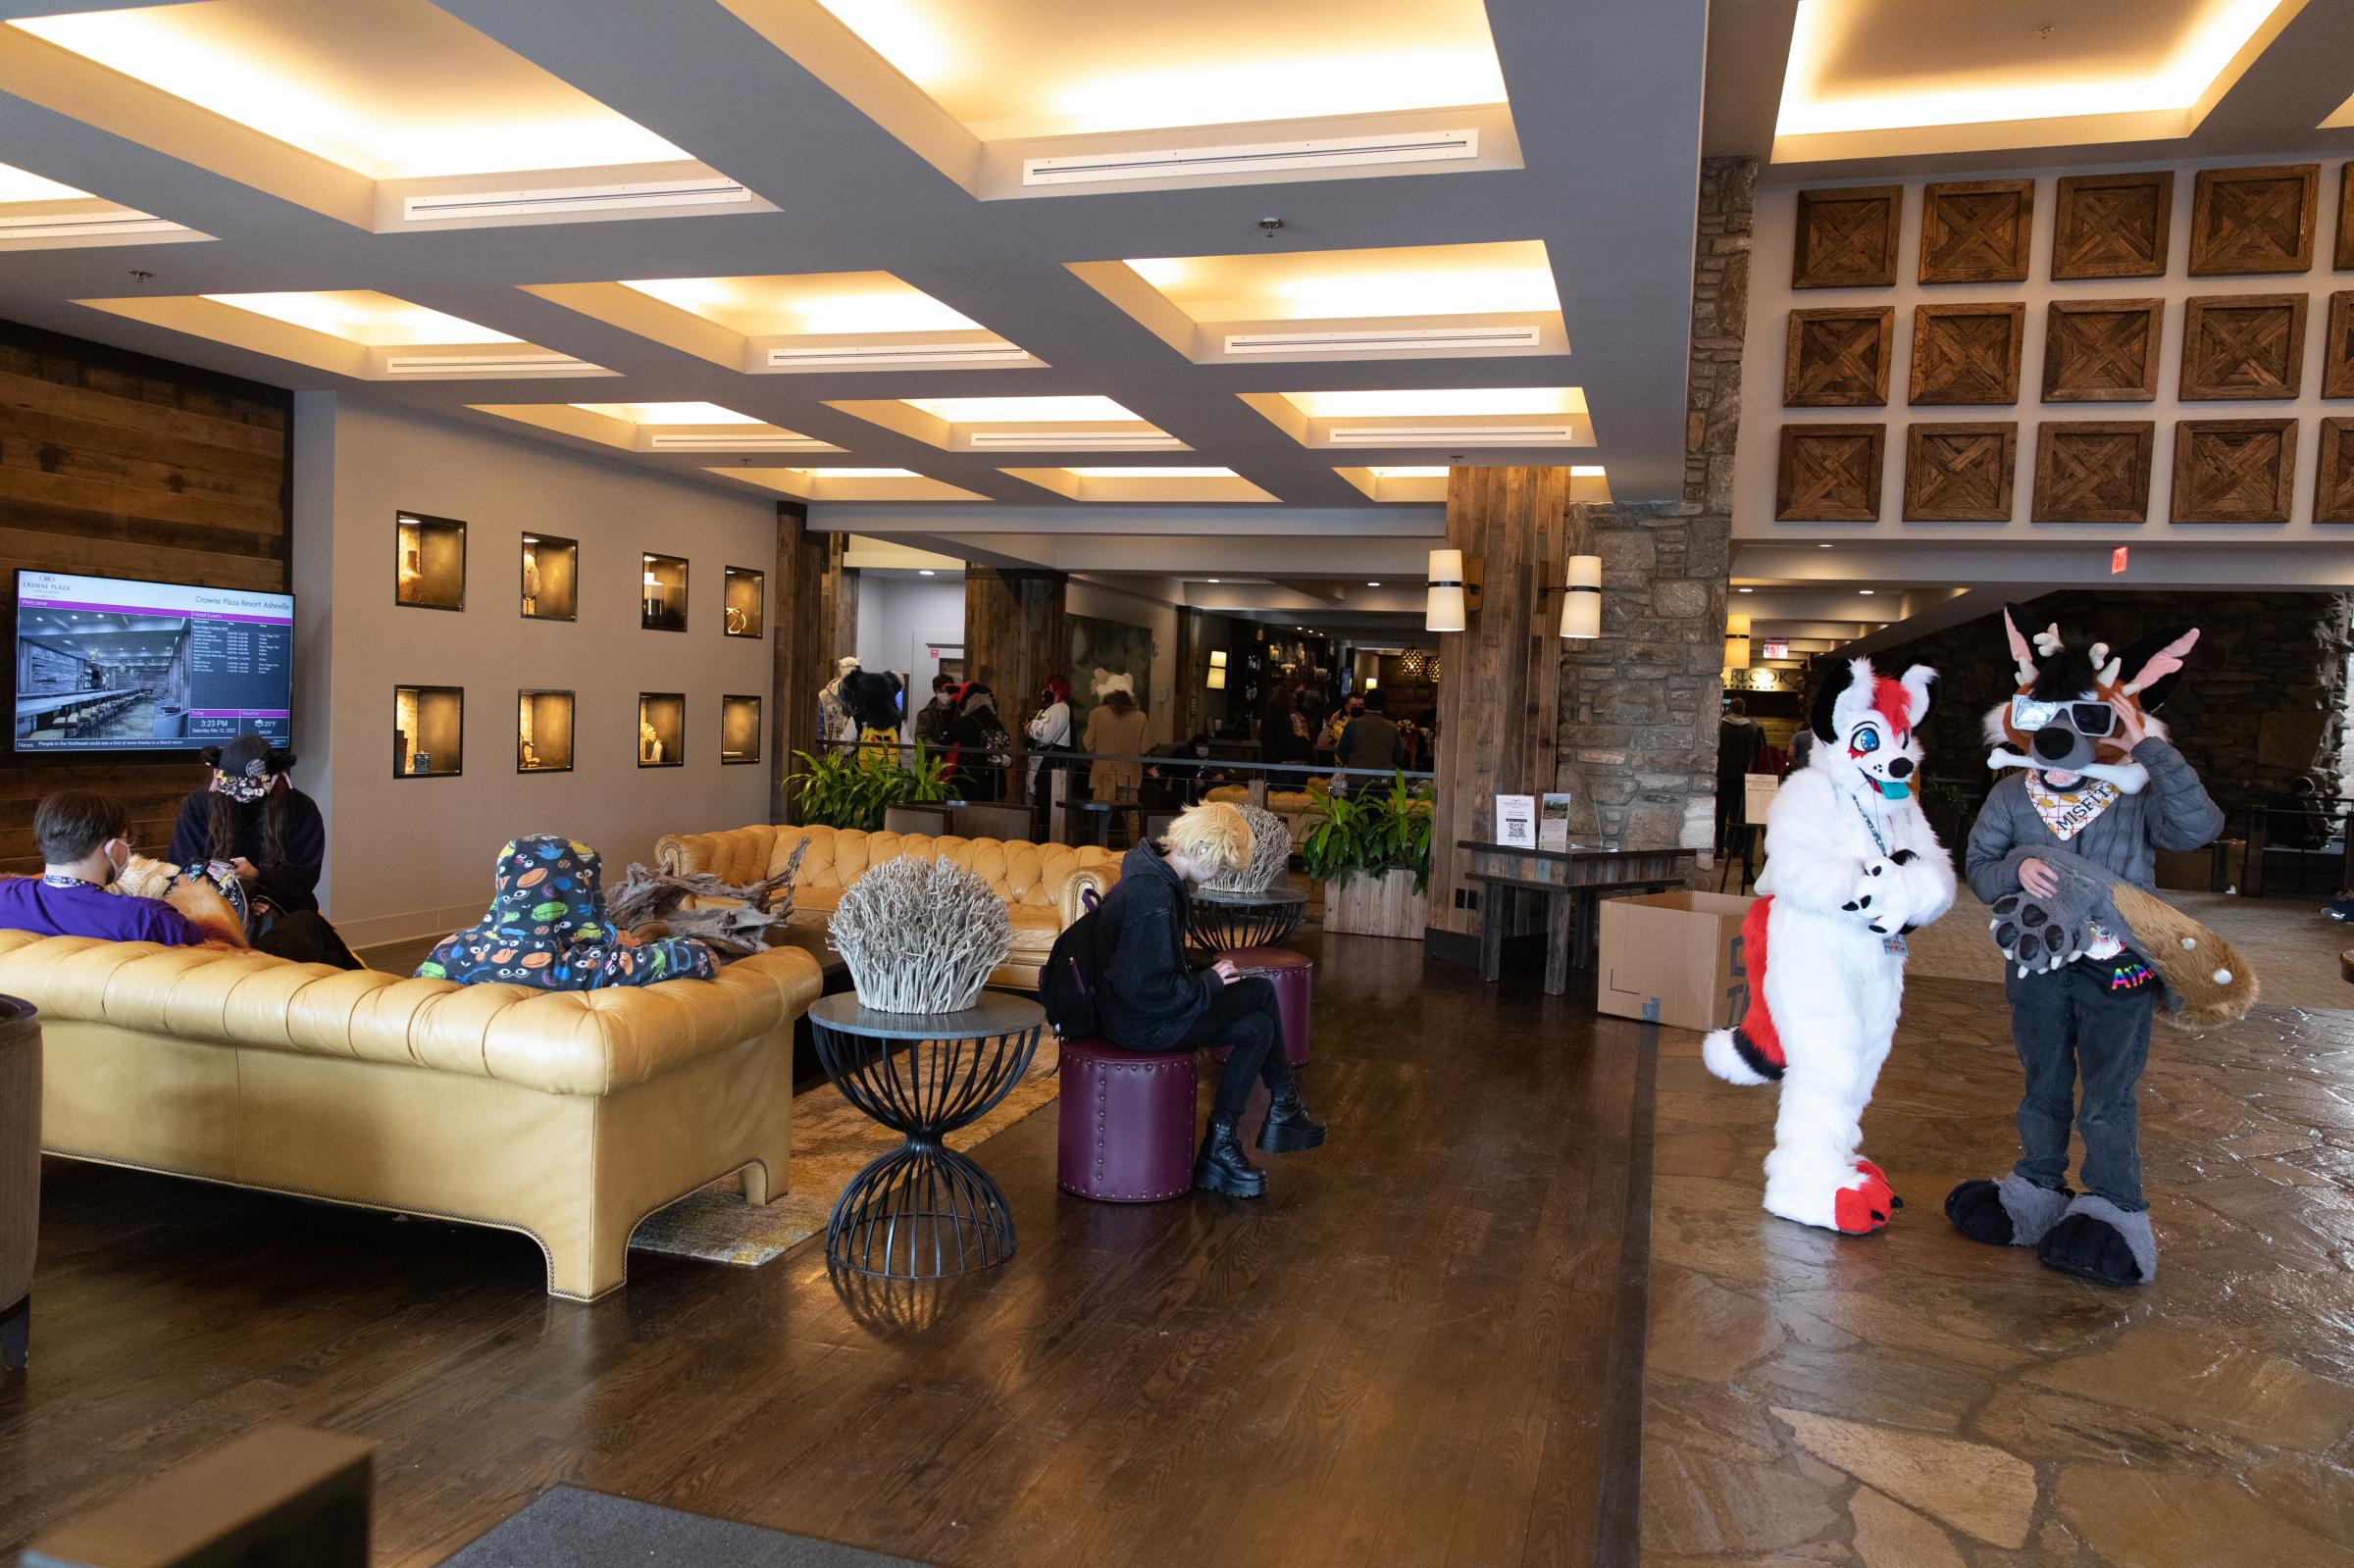 Furry Fandom - The lobby of the Crown Plaza hotel in Asheville, NC included furries with tails or elaborate...